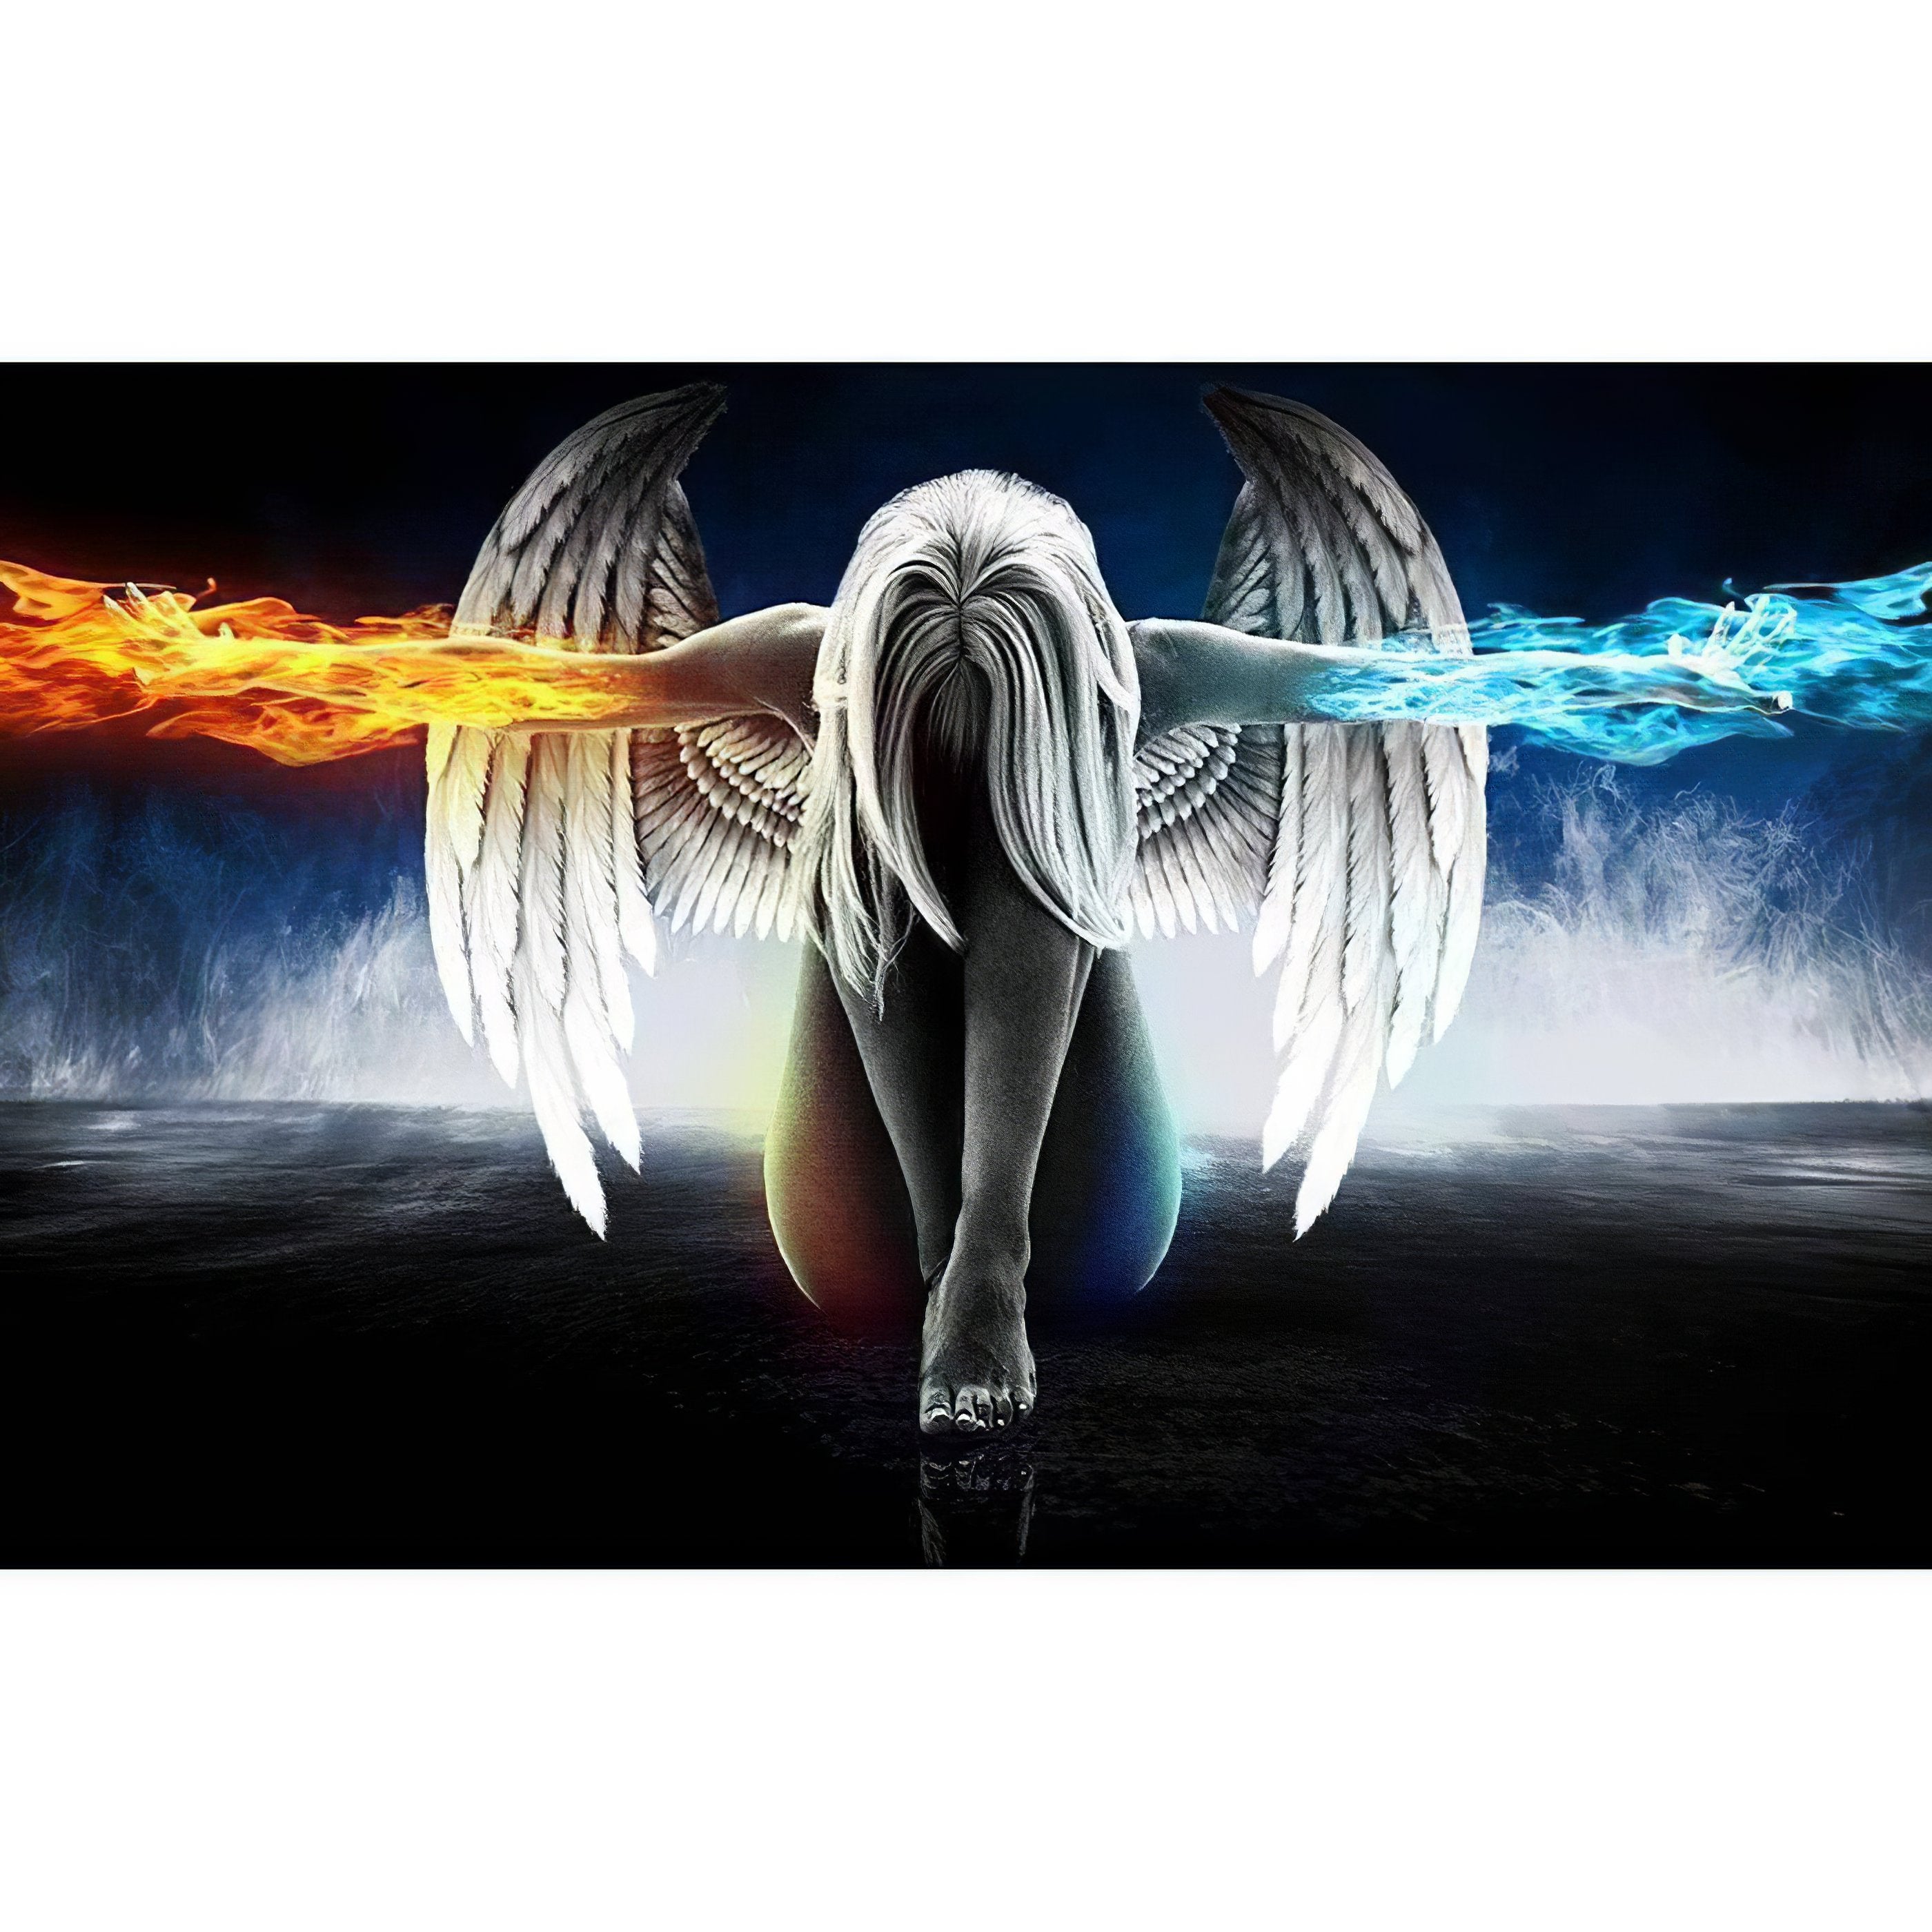 Capture the fierce contrast in Girl With Ice And Fire.Girl With Ice And Fire - Diamondartlove